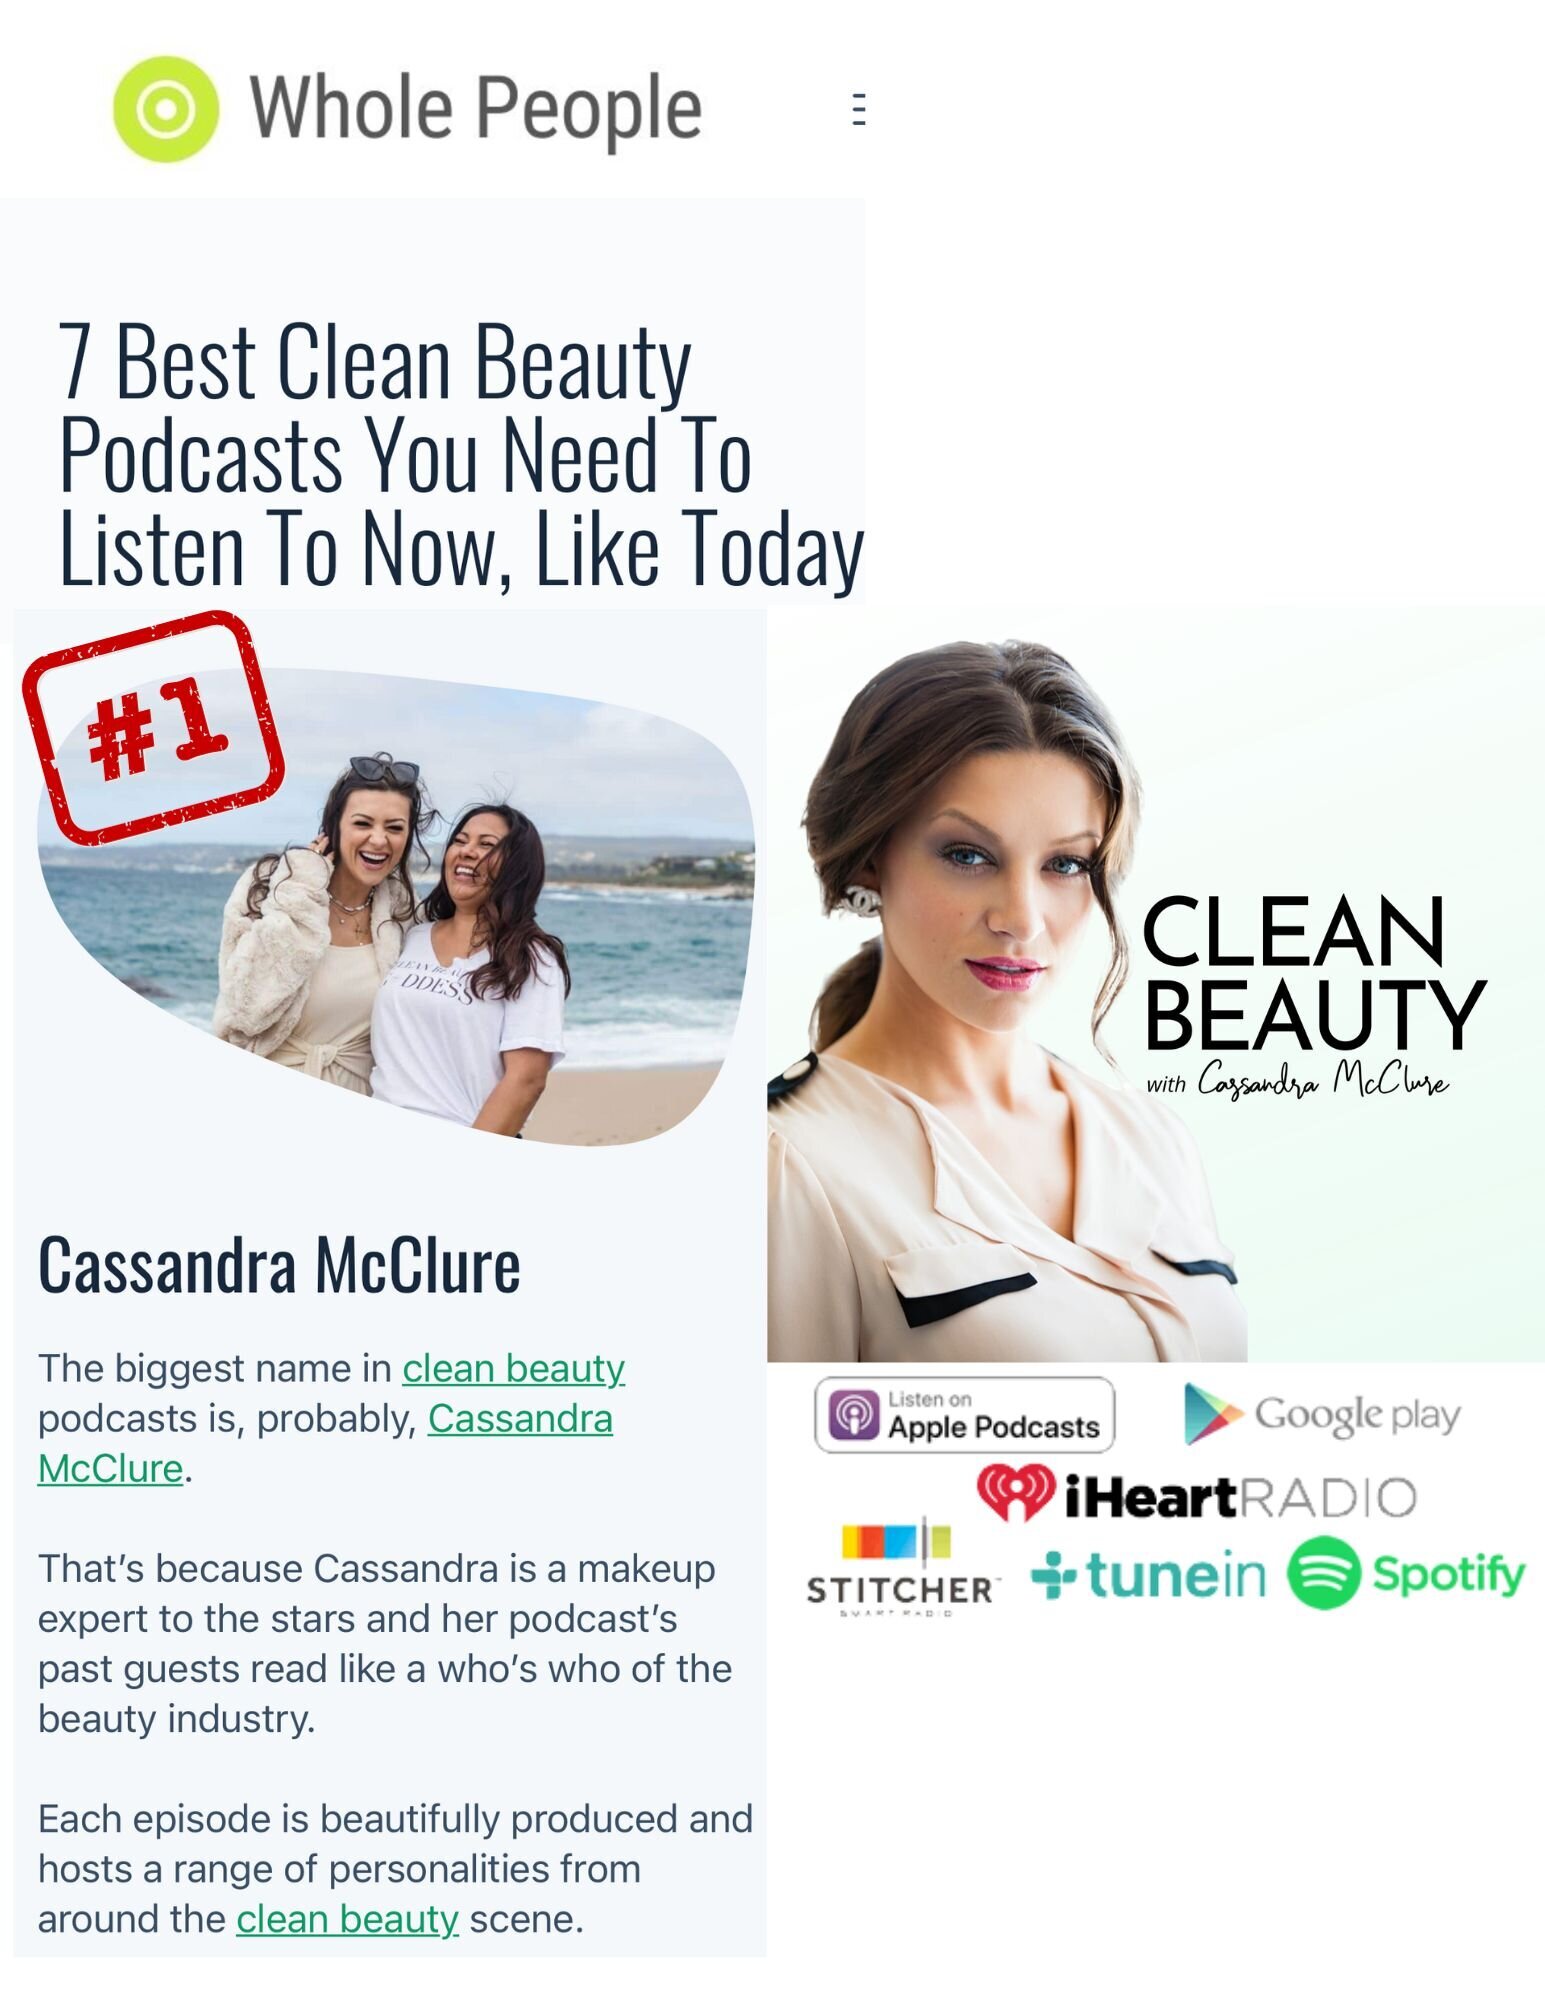 Clean Beauty Show voted #1 best beauty podcast